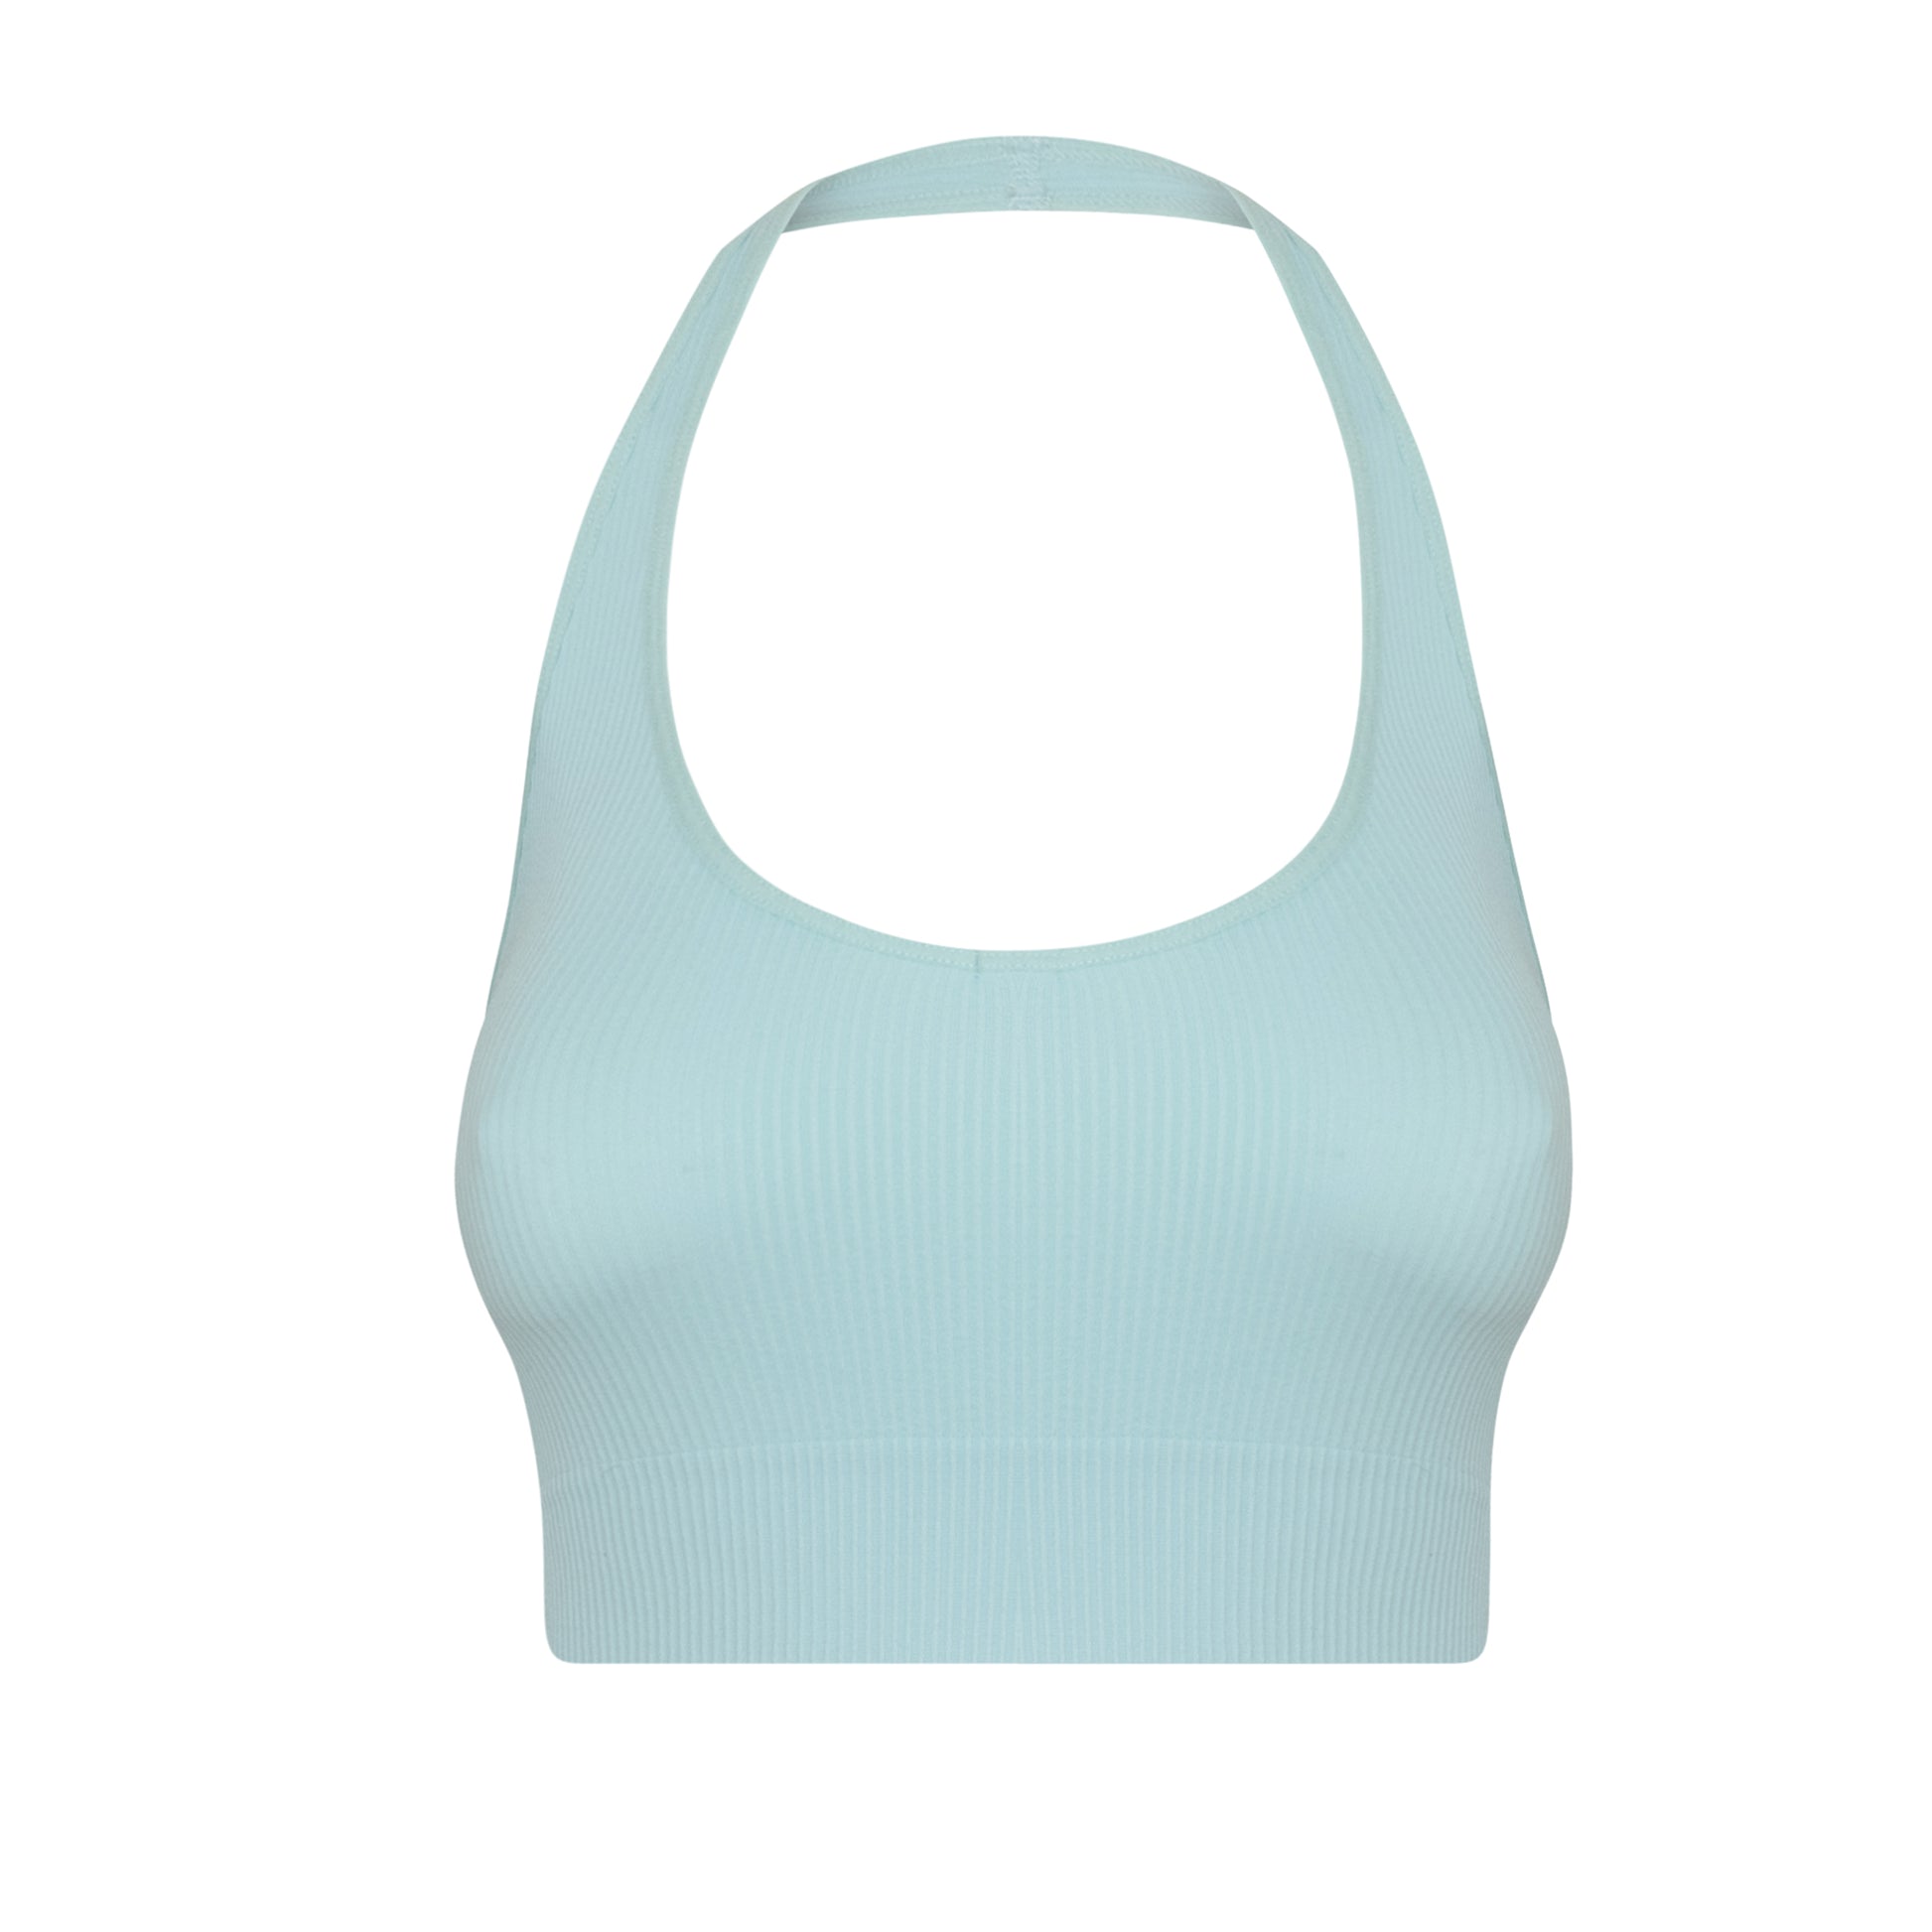 Women's Sexy Halter Neck Top Bra Small (S) Size by S9 TREND - Light Blue